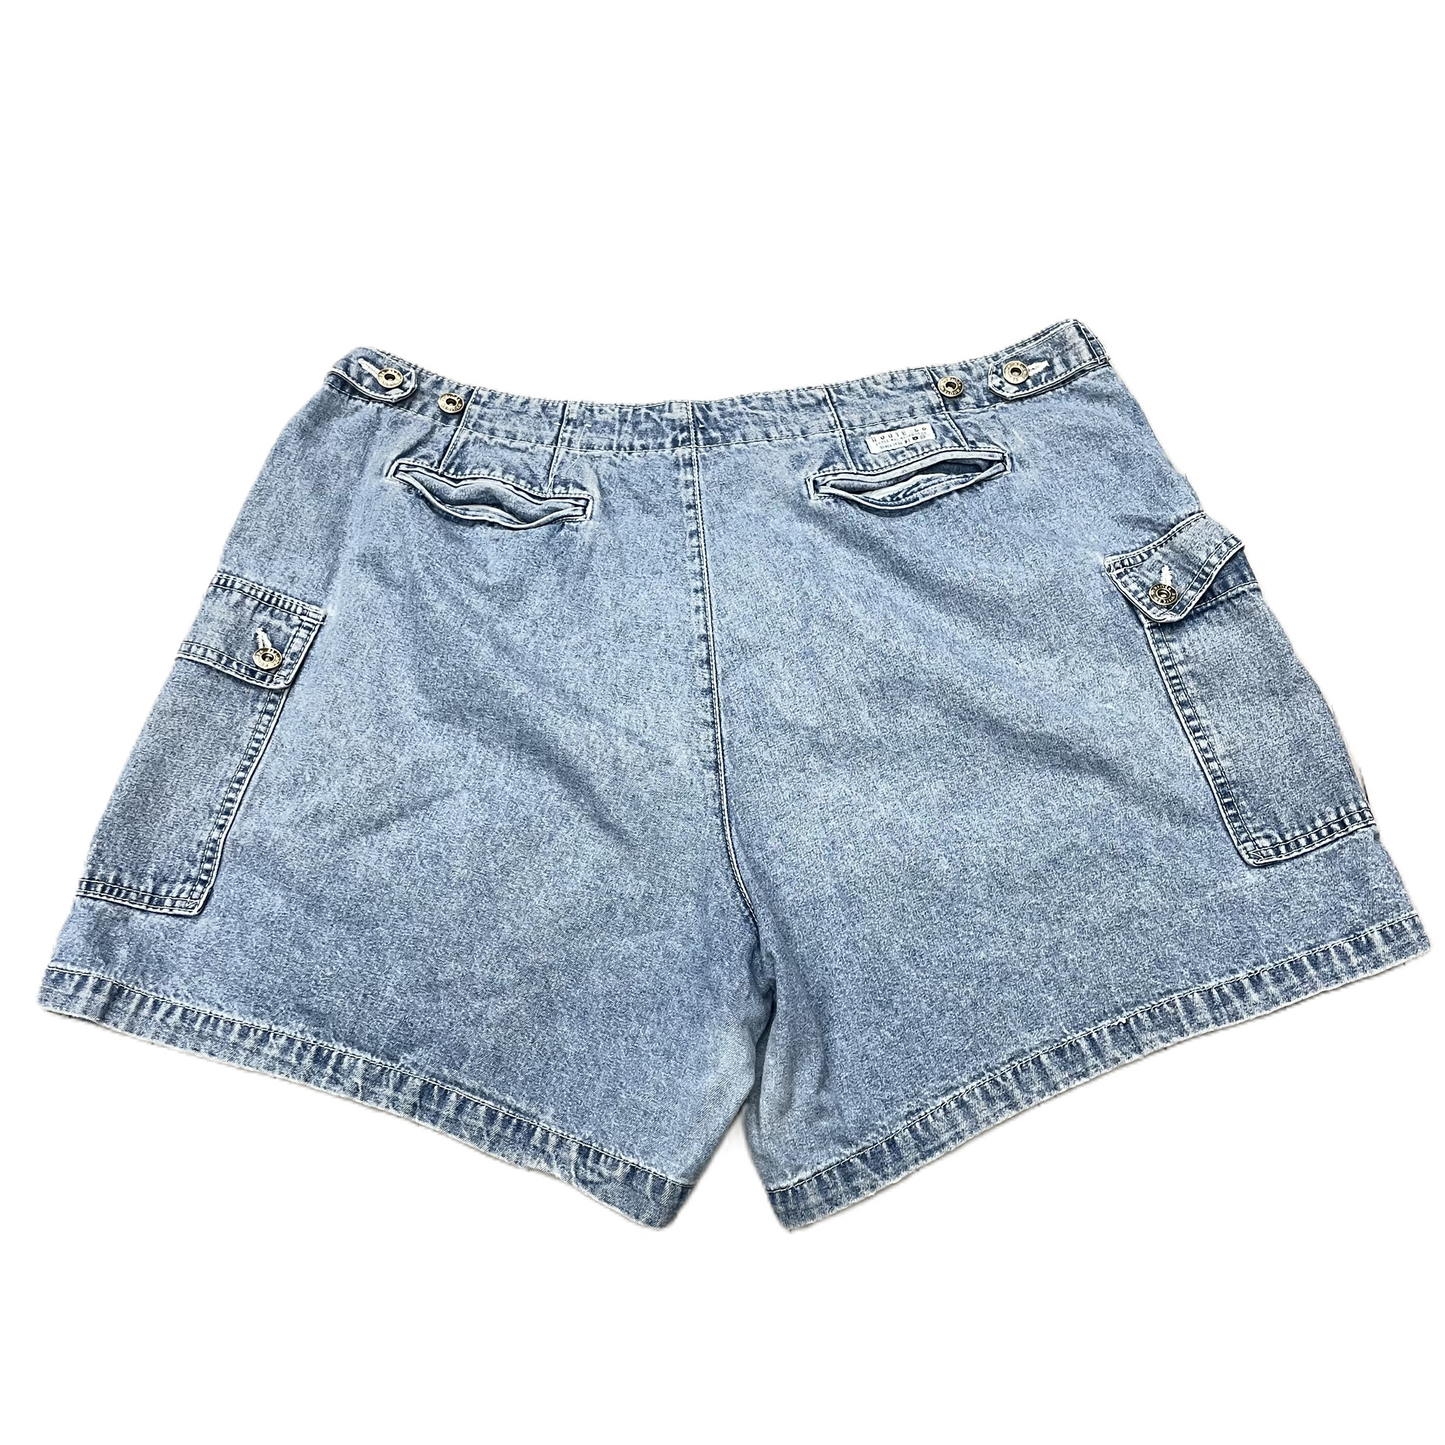 Blue Shorts By Route 66, Size: 22